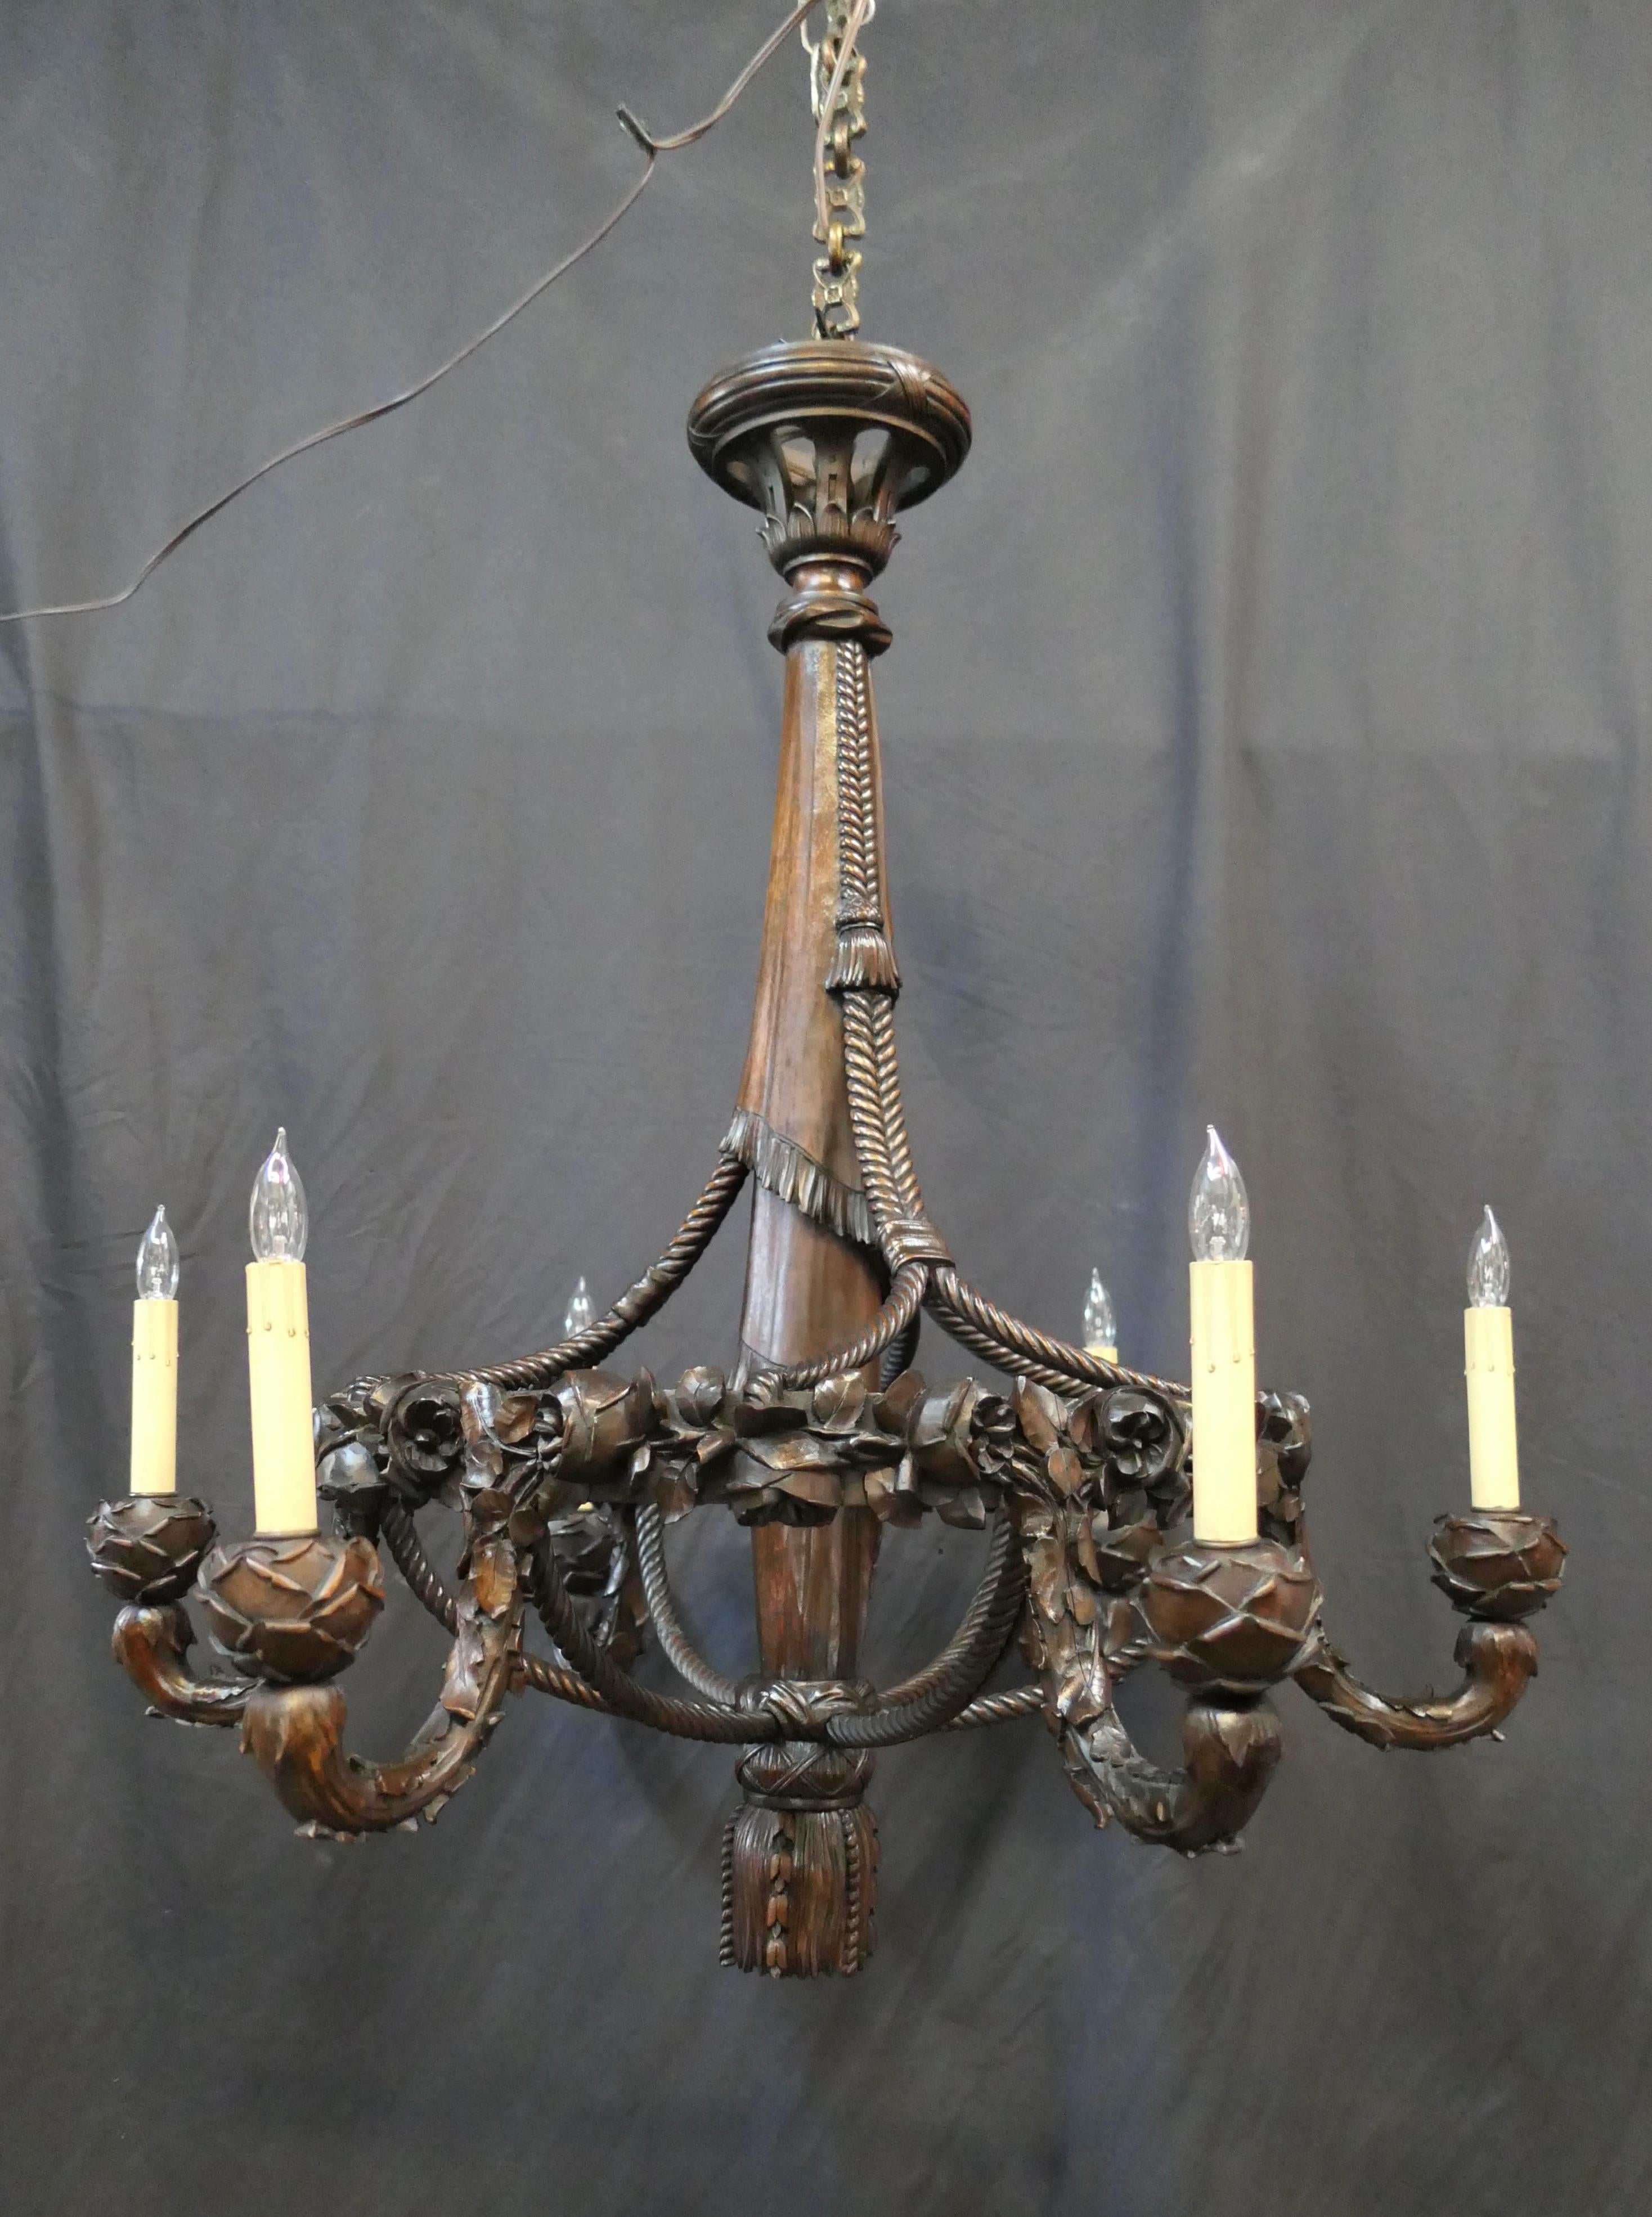 This stunning early 20th century French hand carved mahogany wood formal chandelier is exceptionally designed with six curved arms embellished with a carved leaf motif. Each arm holds a bulbous bloom supporting a tall cream color candle sleeve with